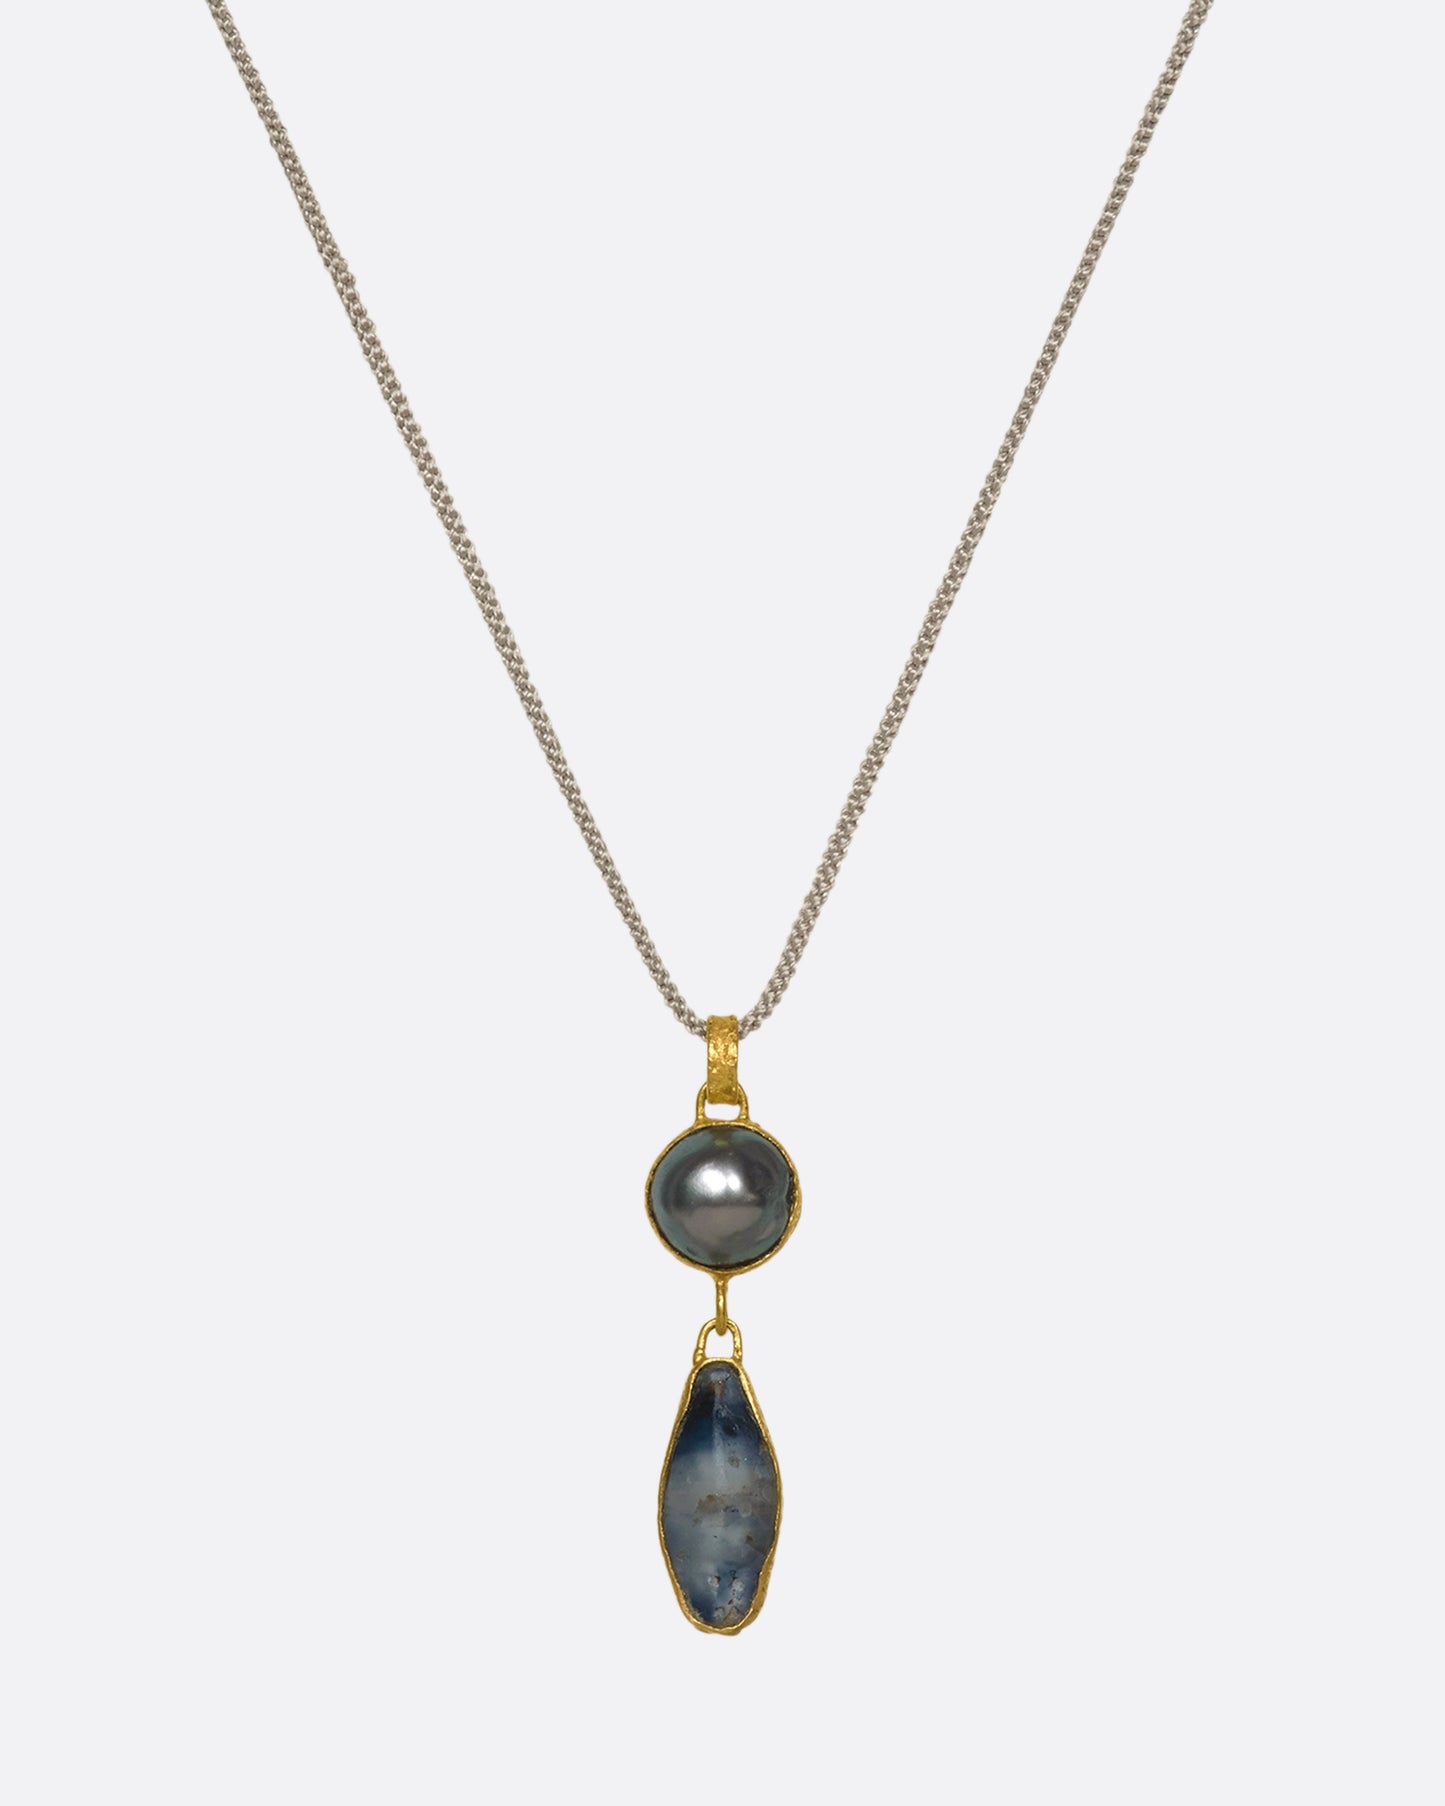 A hanging yellow gold pendant with a pearl and Sri Lankan sapphire on a cord.